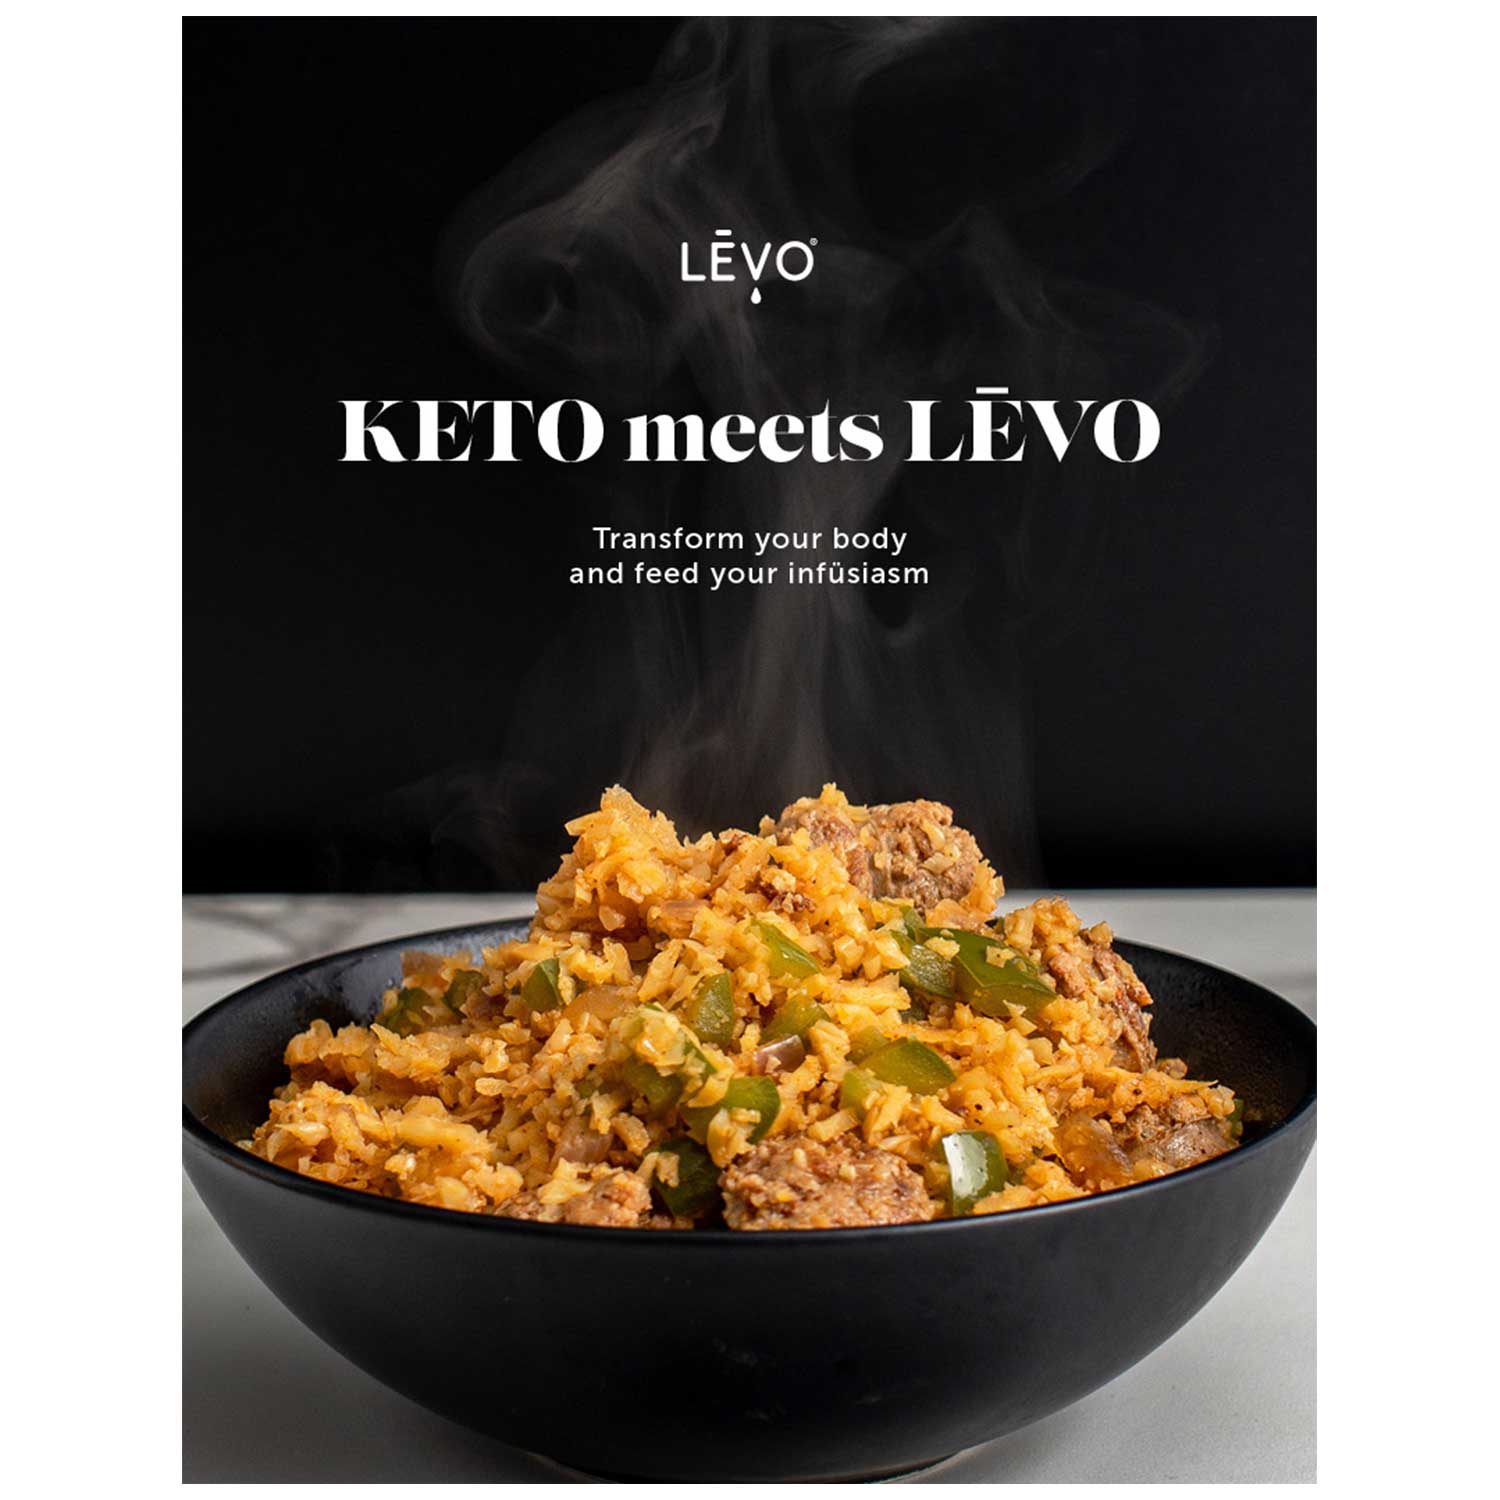 In our "Keto meets LEVO" digital cookbook, we’re exploring Keto recipes for breakfast, lunch, dinner, and dessert, by tapping members of our own team who are Keto followers, as well as receiving great input from Keto experts. 